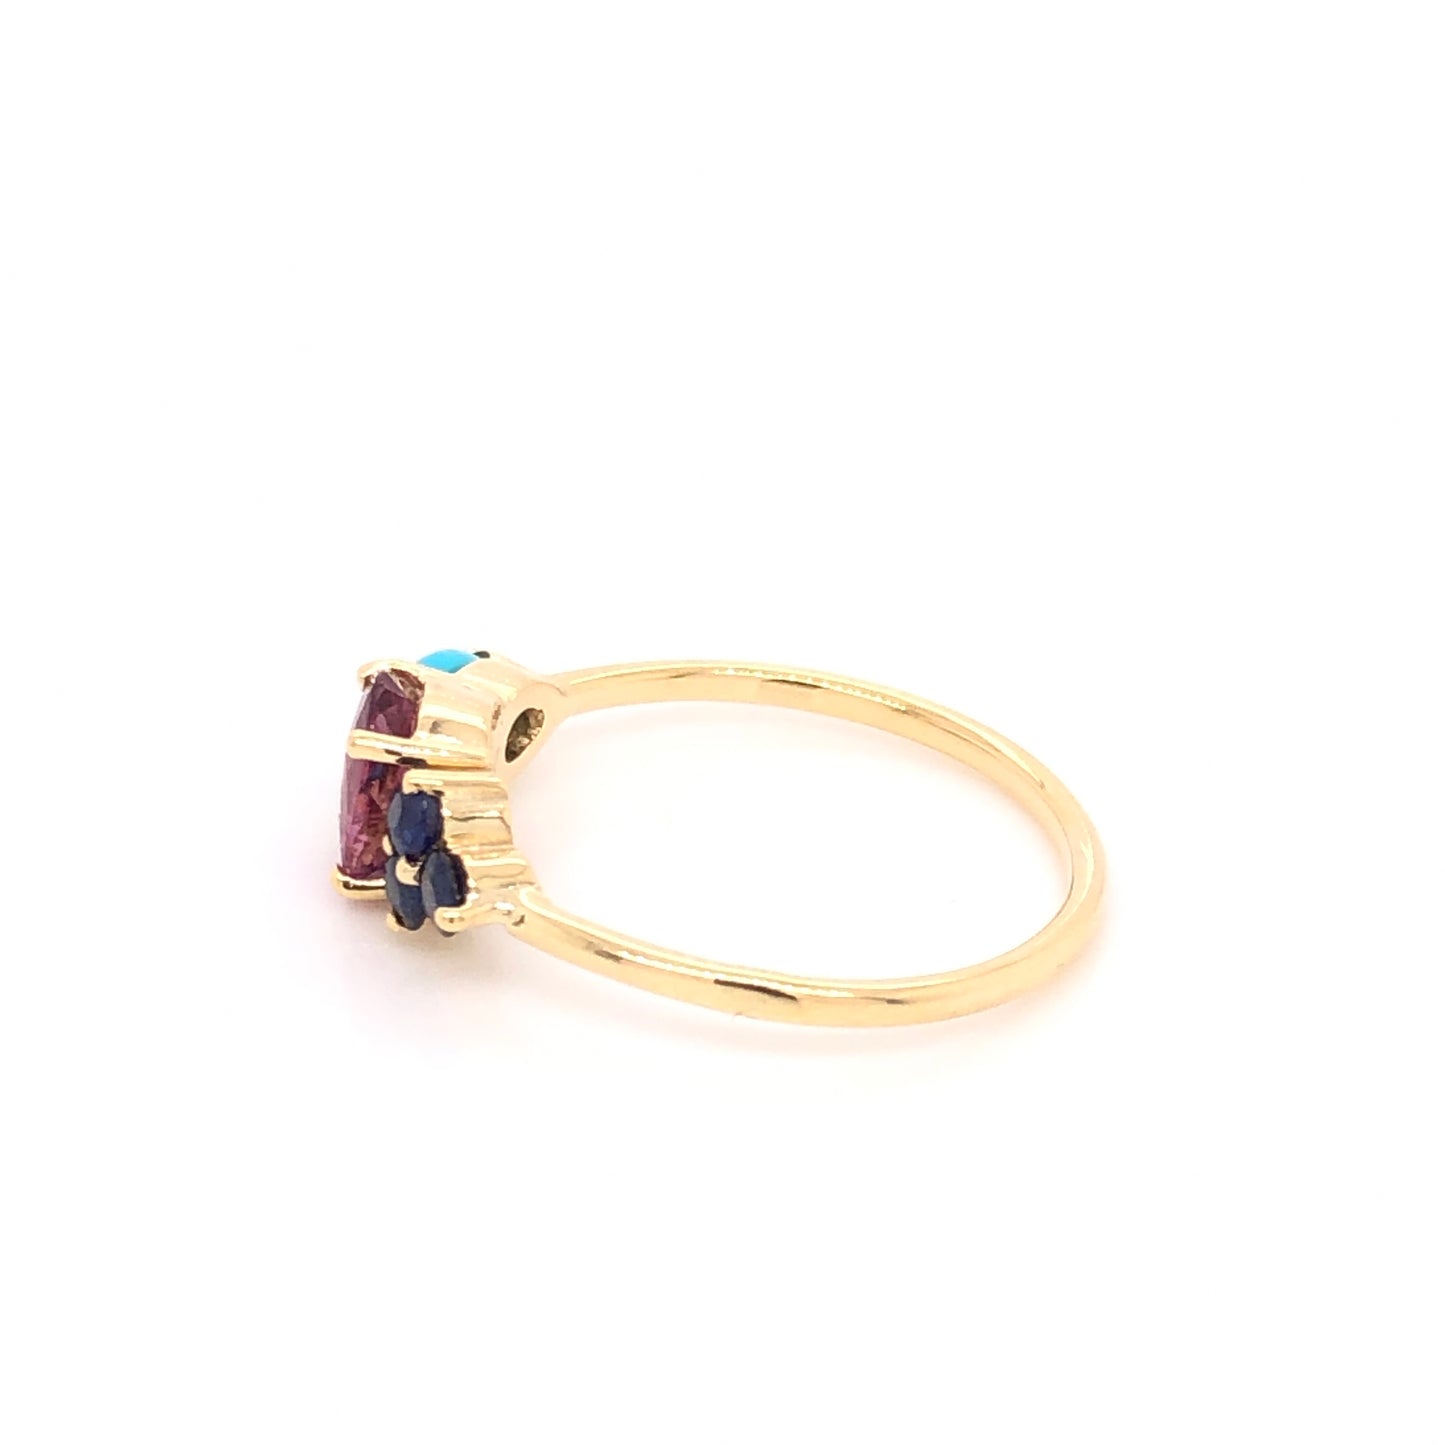 Garnet Ring with Turquoise and Blue Sapphire